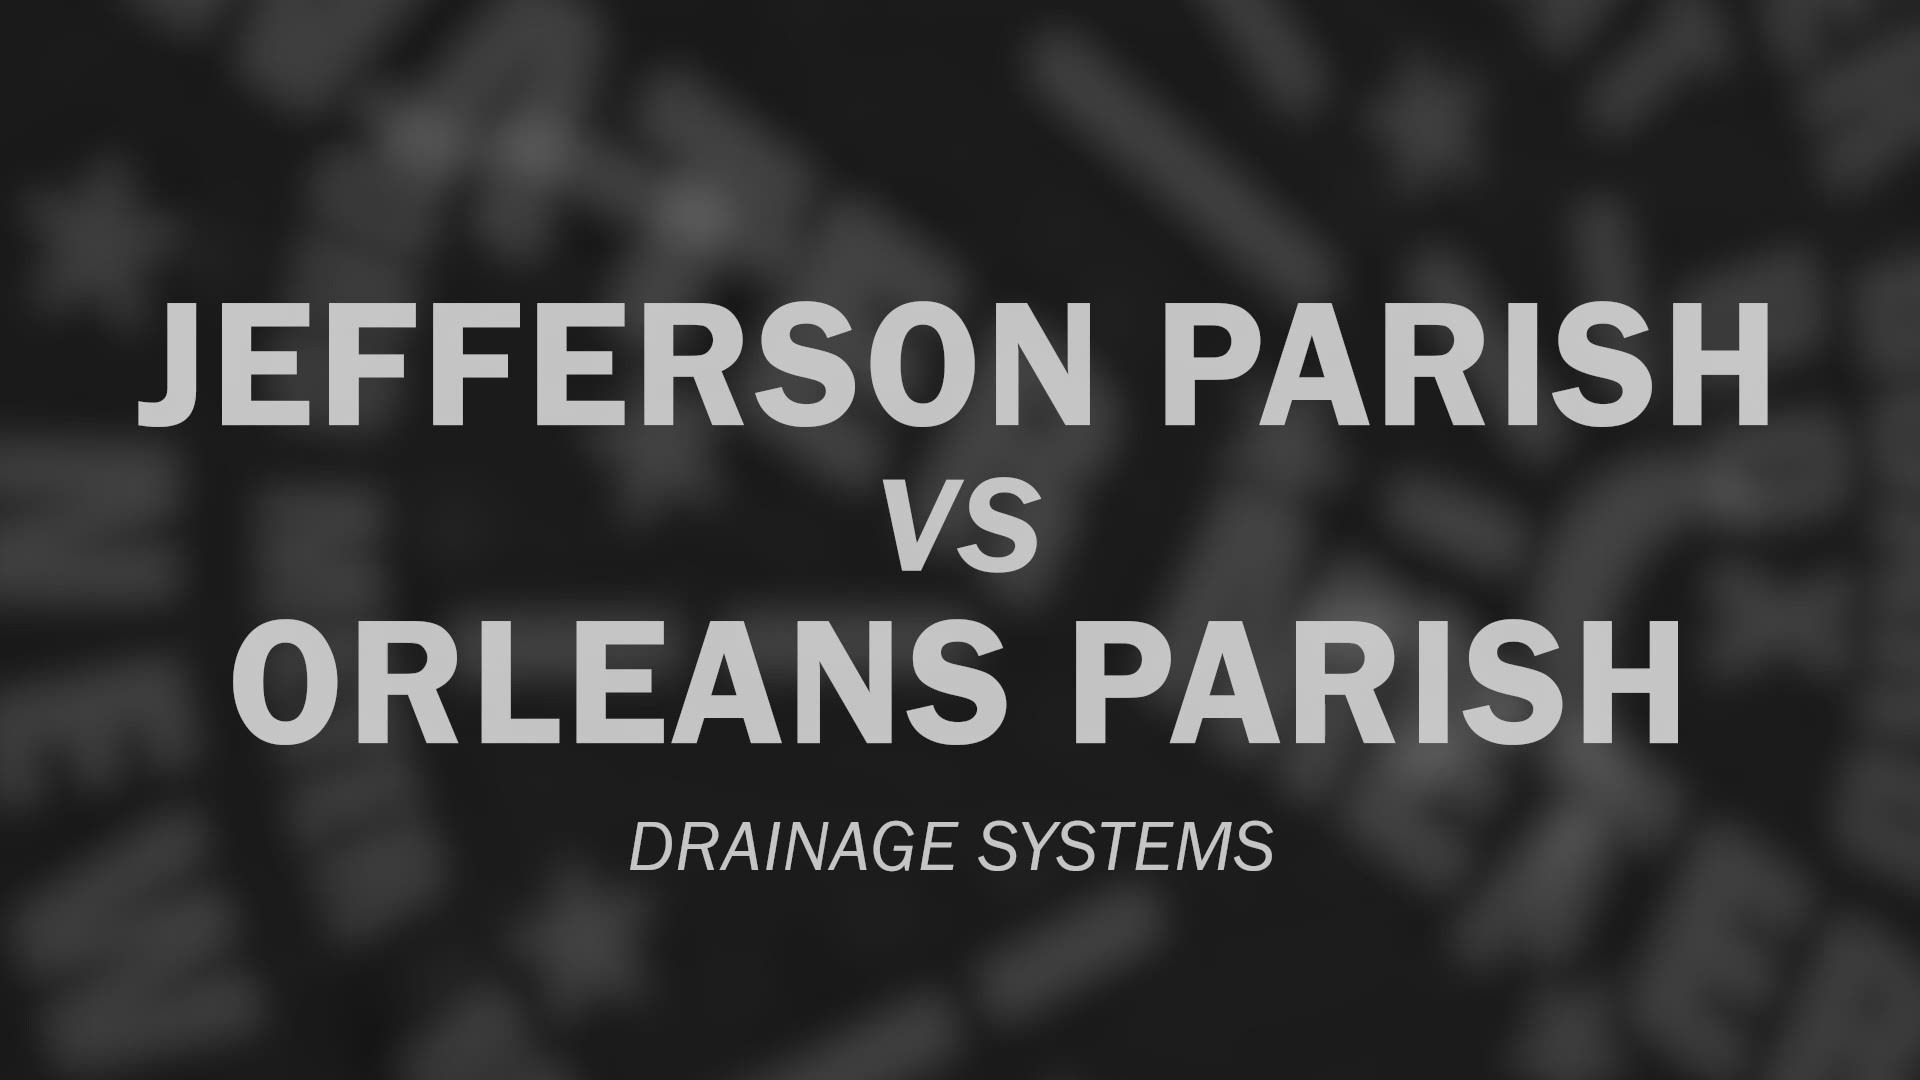 How do the Jefferson Parish and Orleans Parish drainage systems compare?